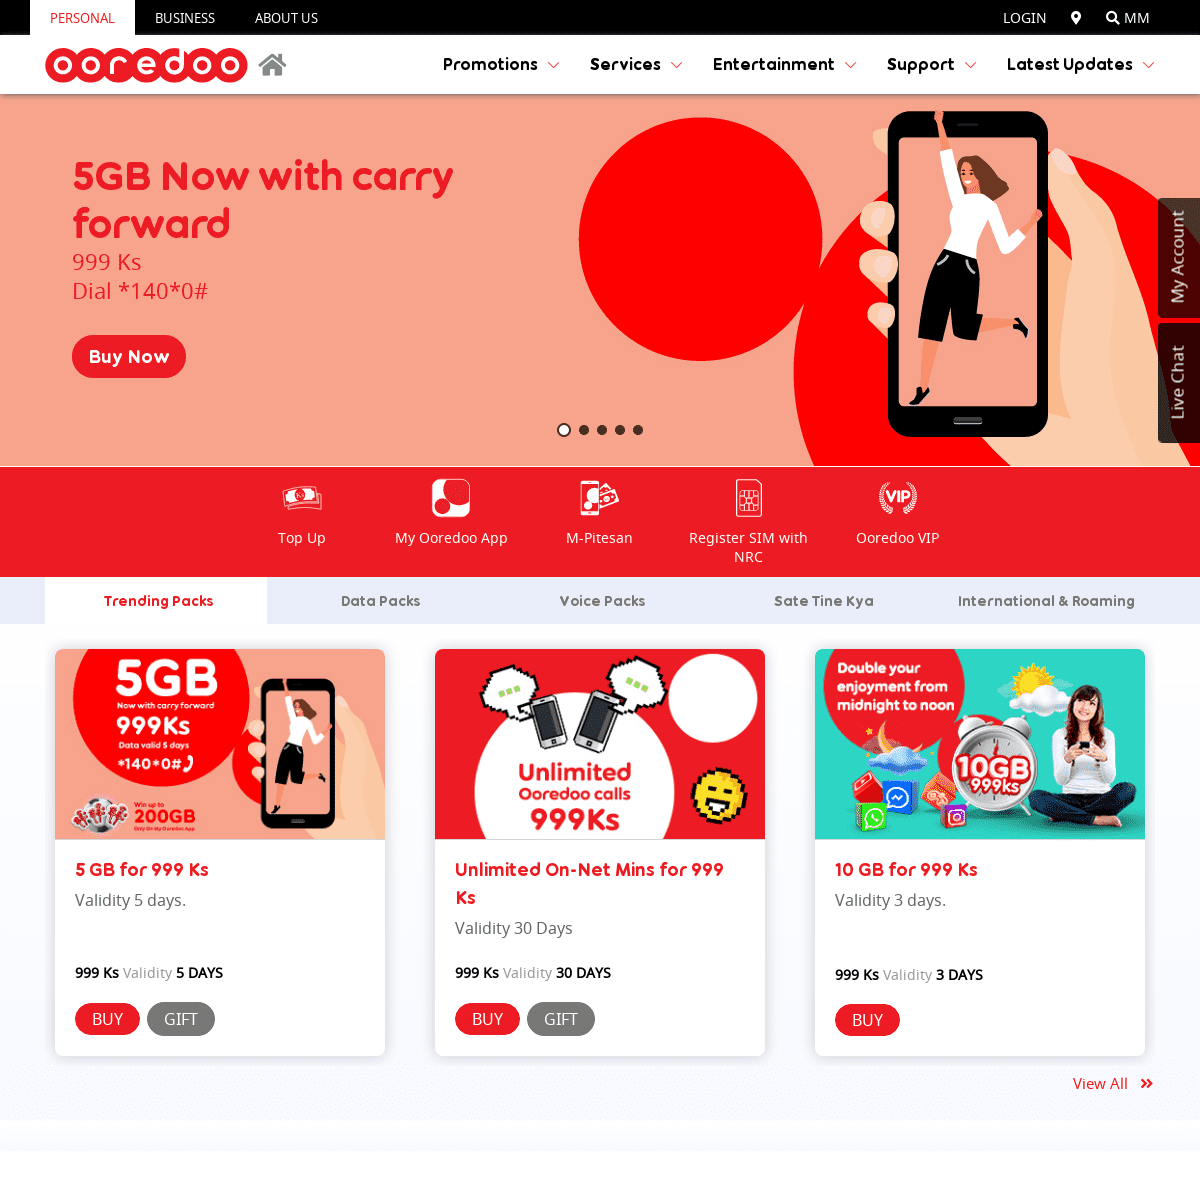 A complete backup of https://ooredoo.com.mm